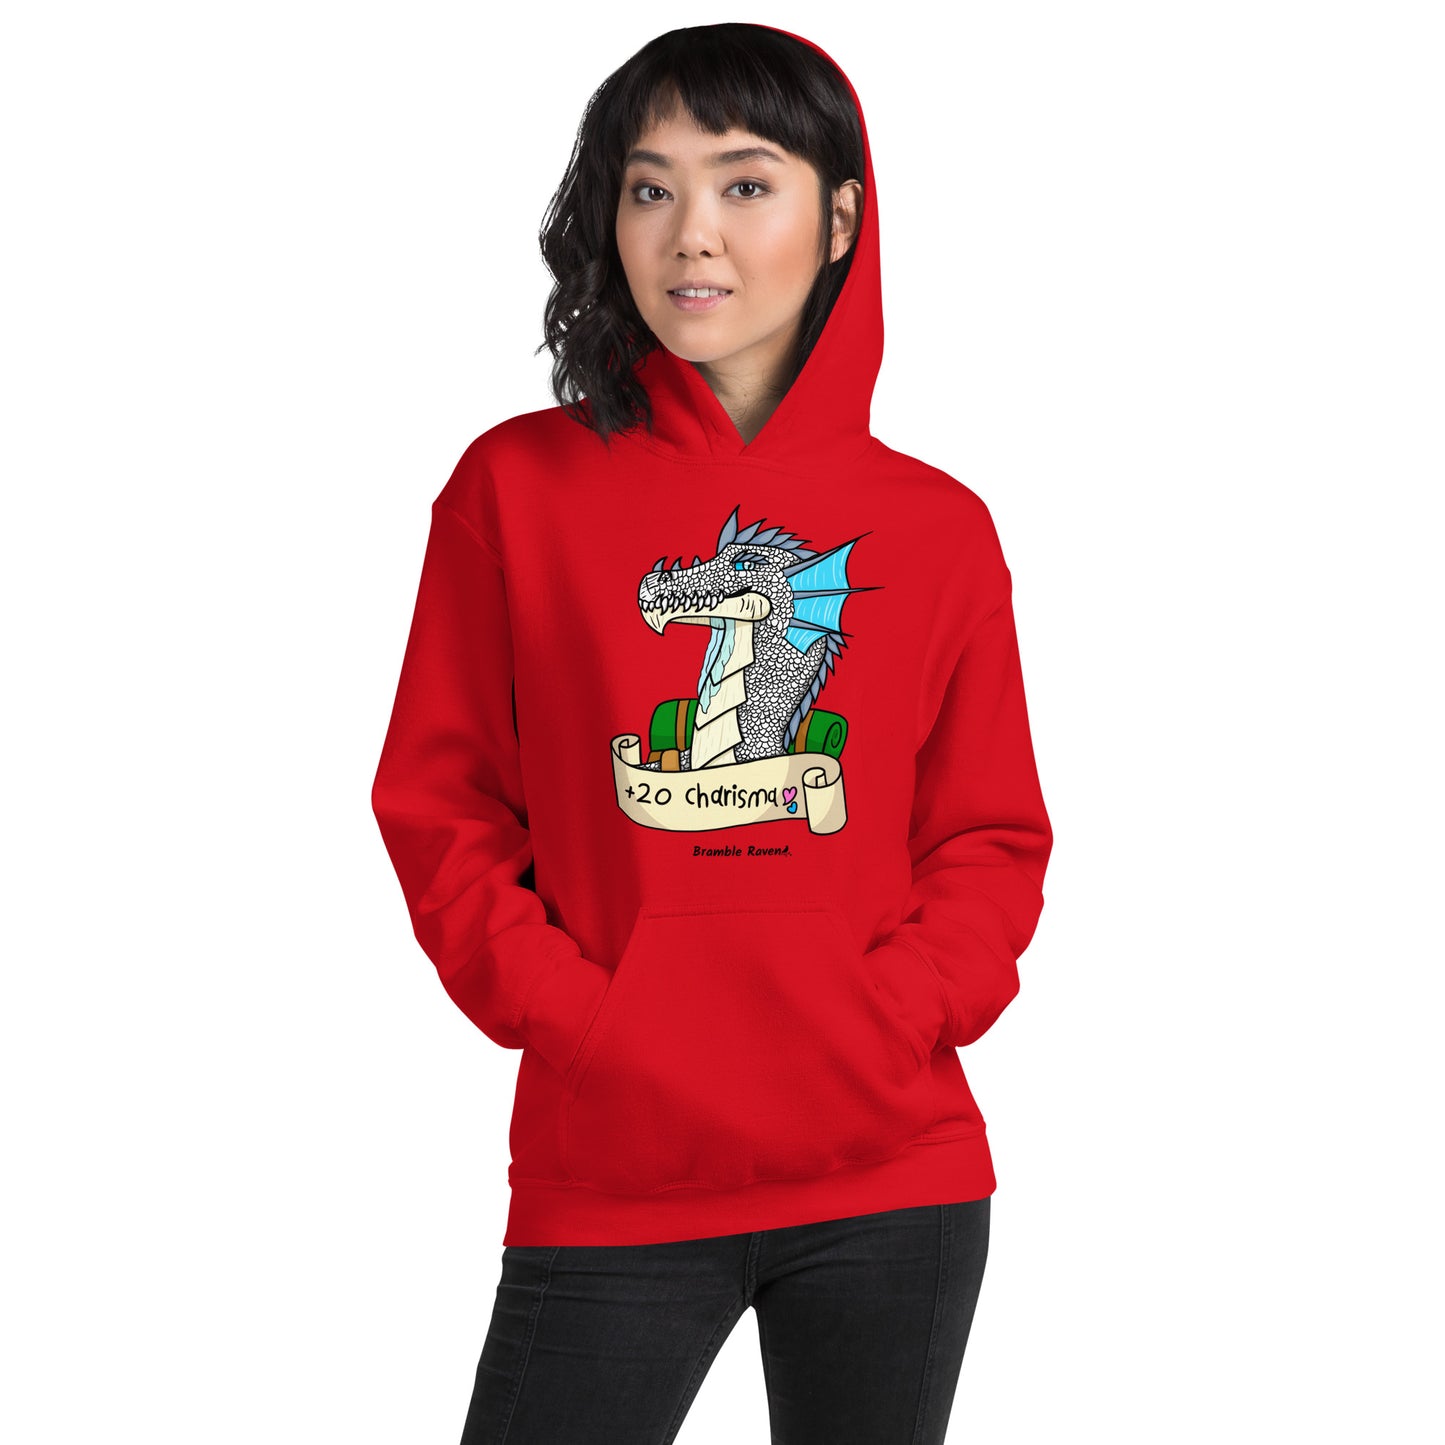 Original Bicycle the Bard dragon +20 Charisma design on unisex red colored hoodie. Shown on female model.